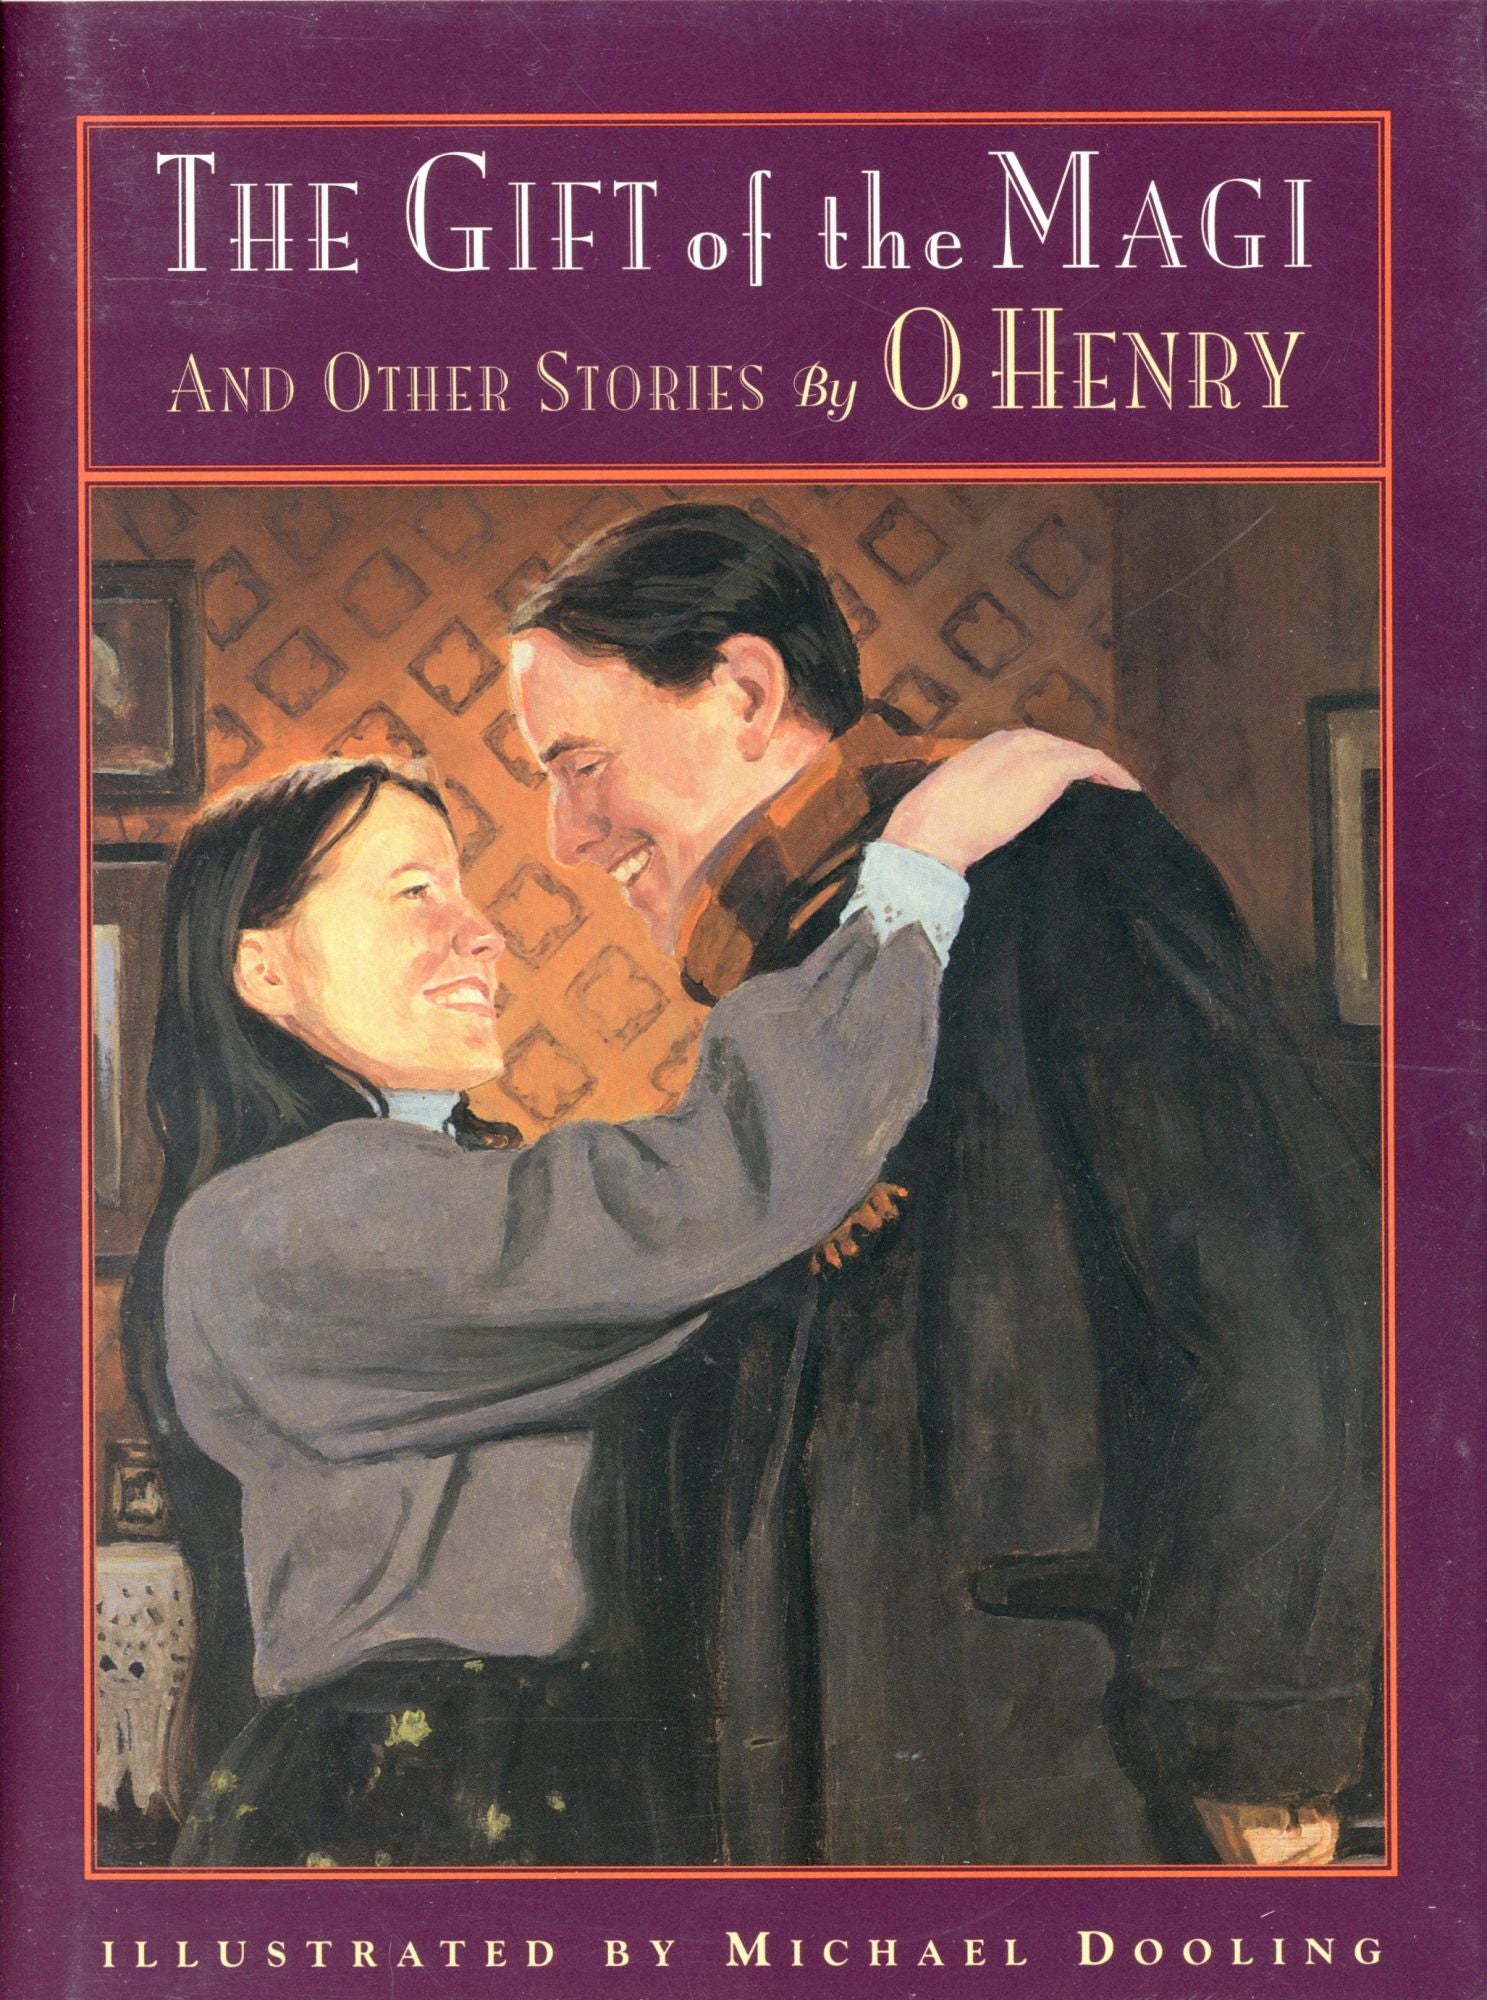 The Gift of the Magi and Other Stories by O. HENRY, Michael Dooling on  Bagatelle Books